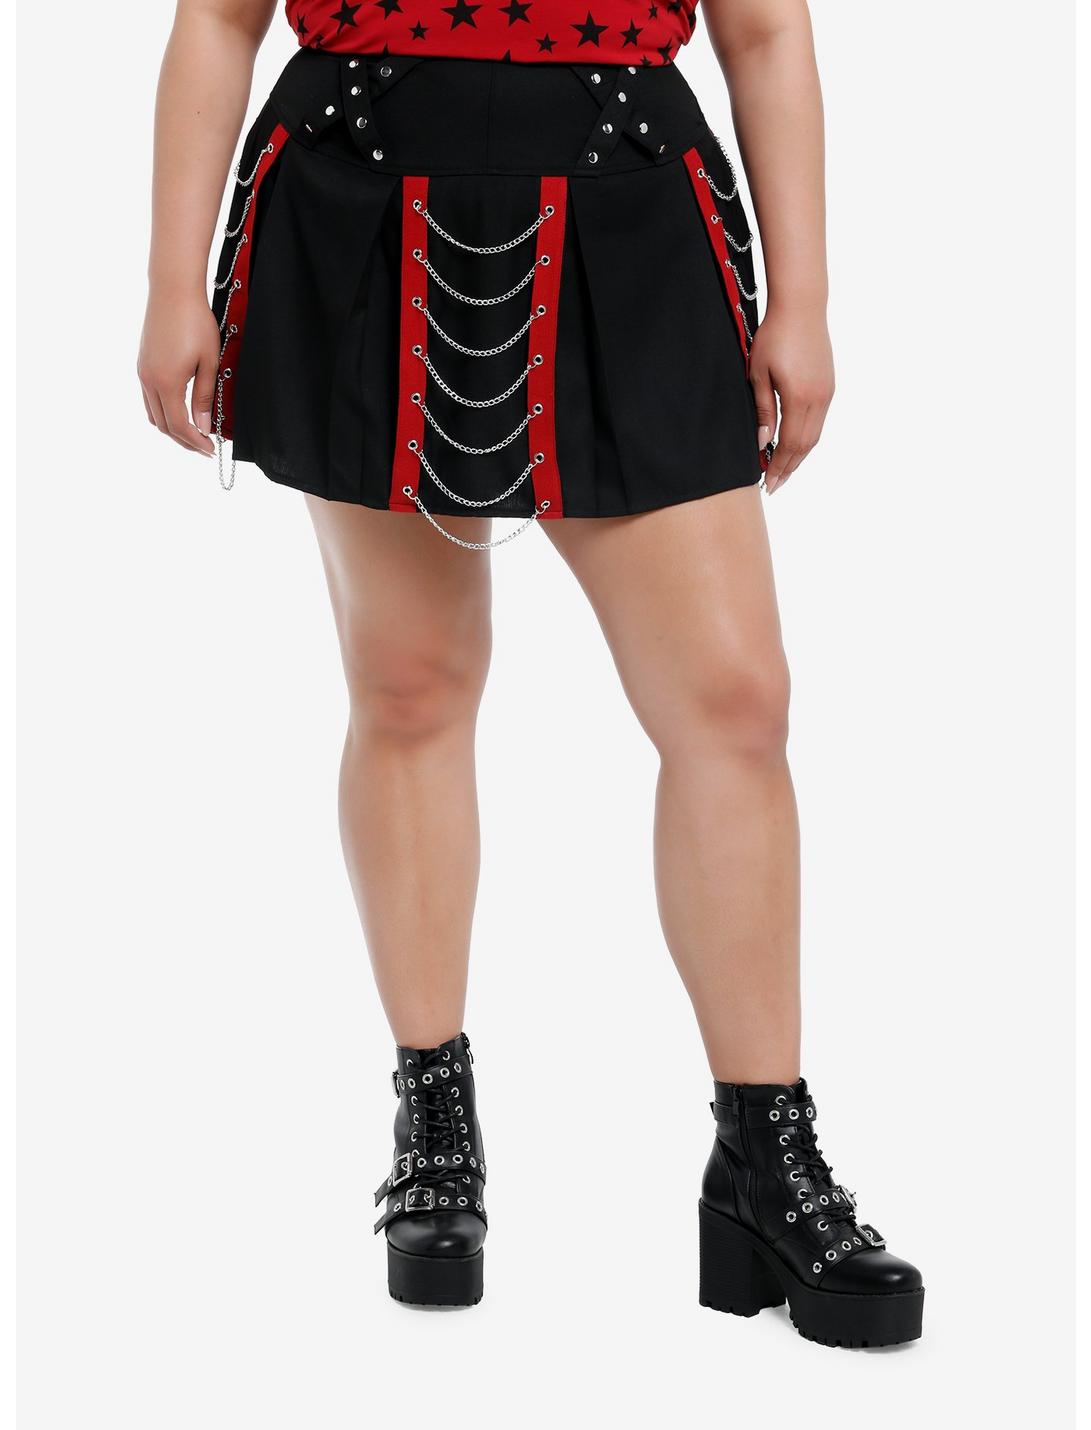 Social Collision Black & Red Chains Pleated Skirt Plus Size, RED, hi-res